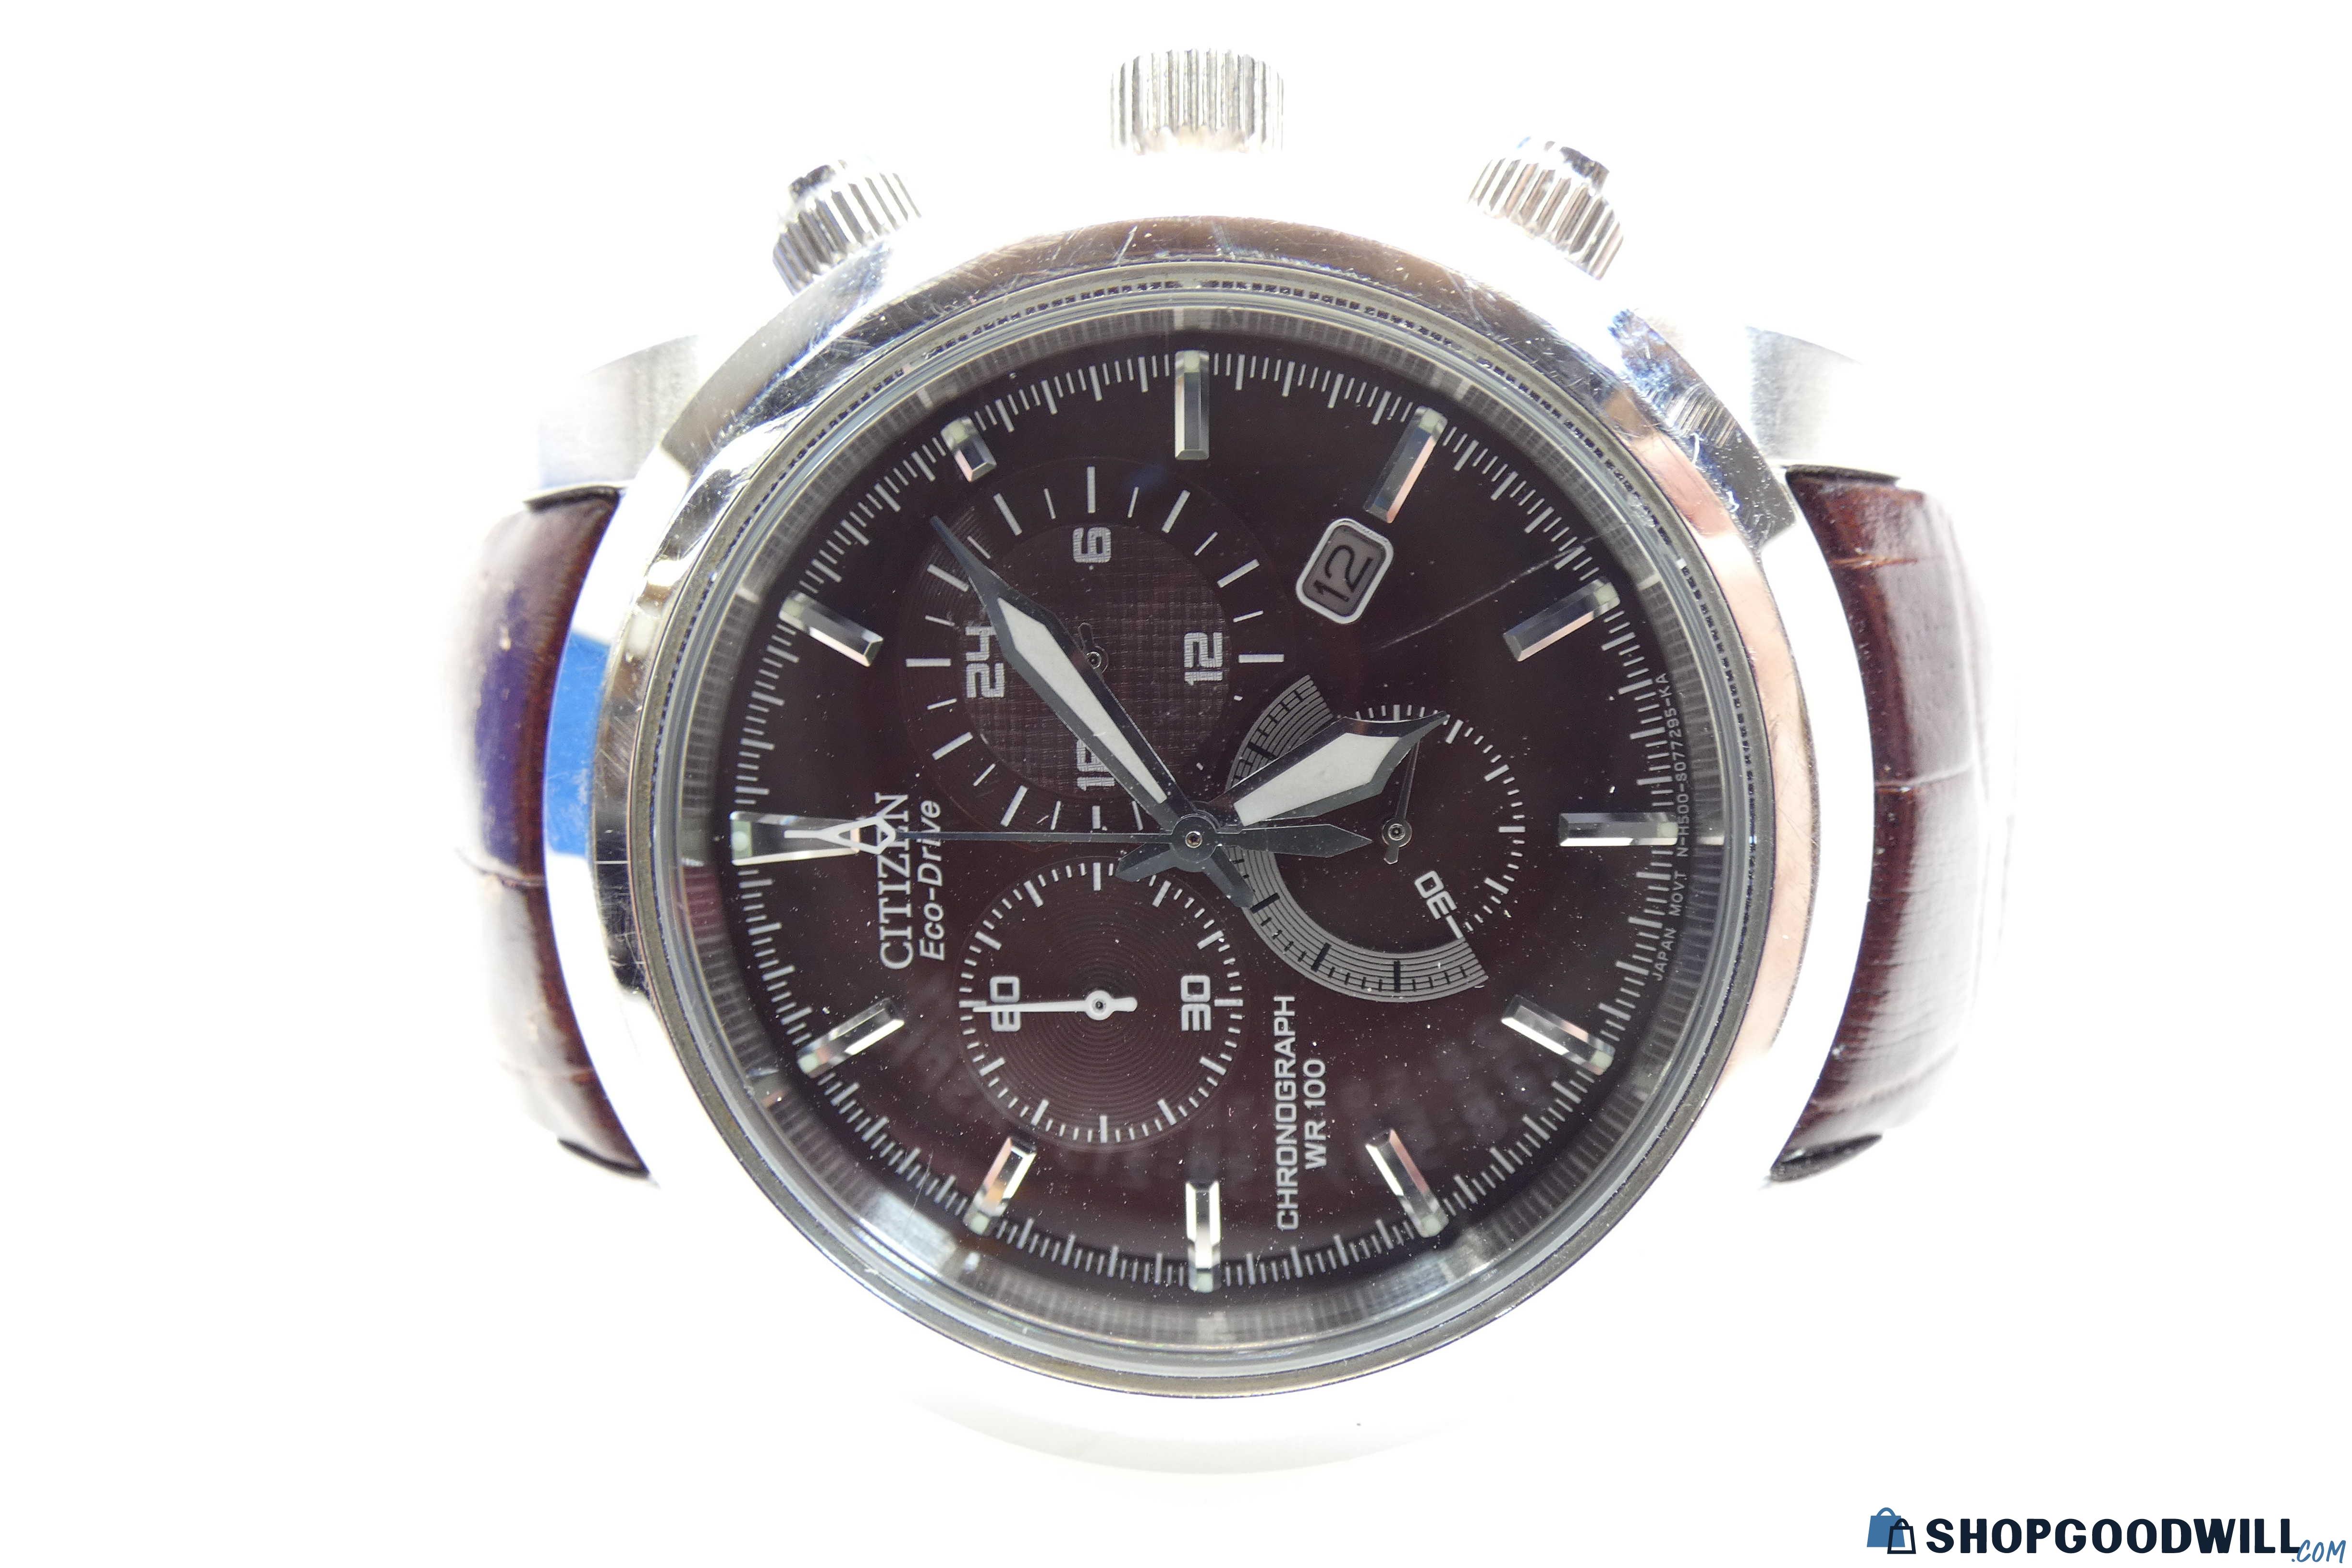 Citizen Eco-Drive Chronograph Stainless Steel Watch 8 1/2'' 76.8g ...